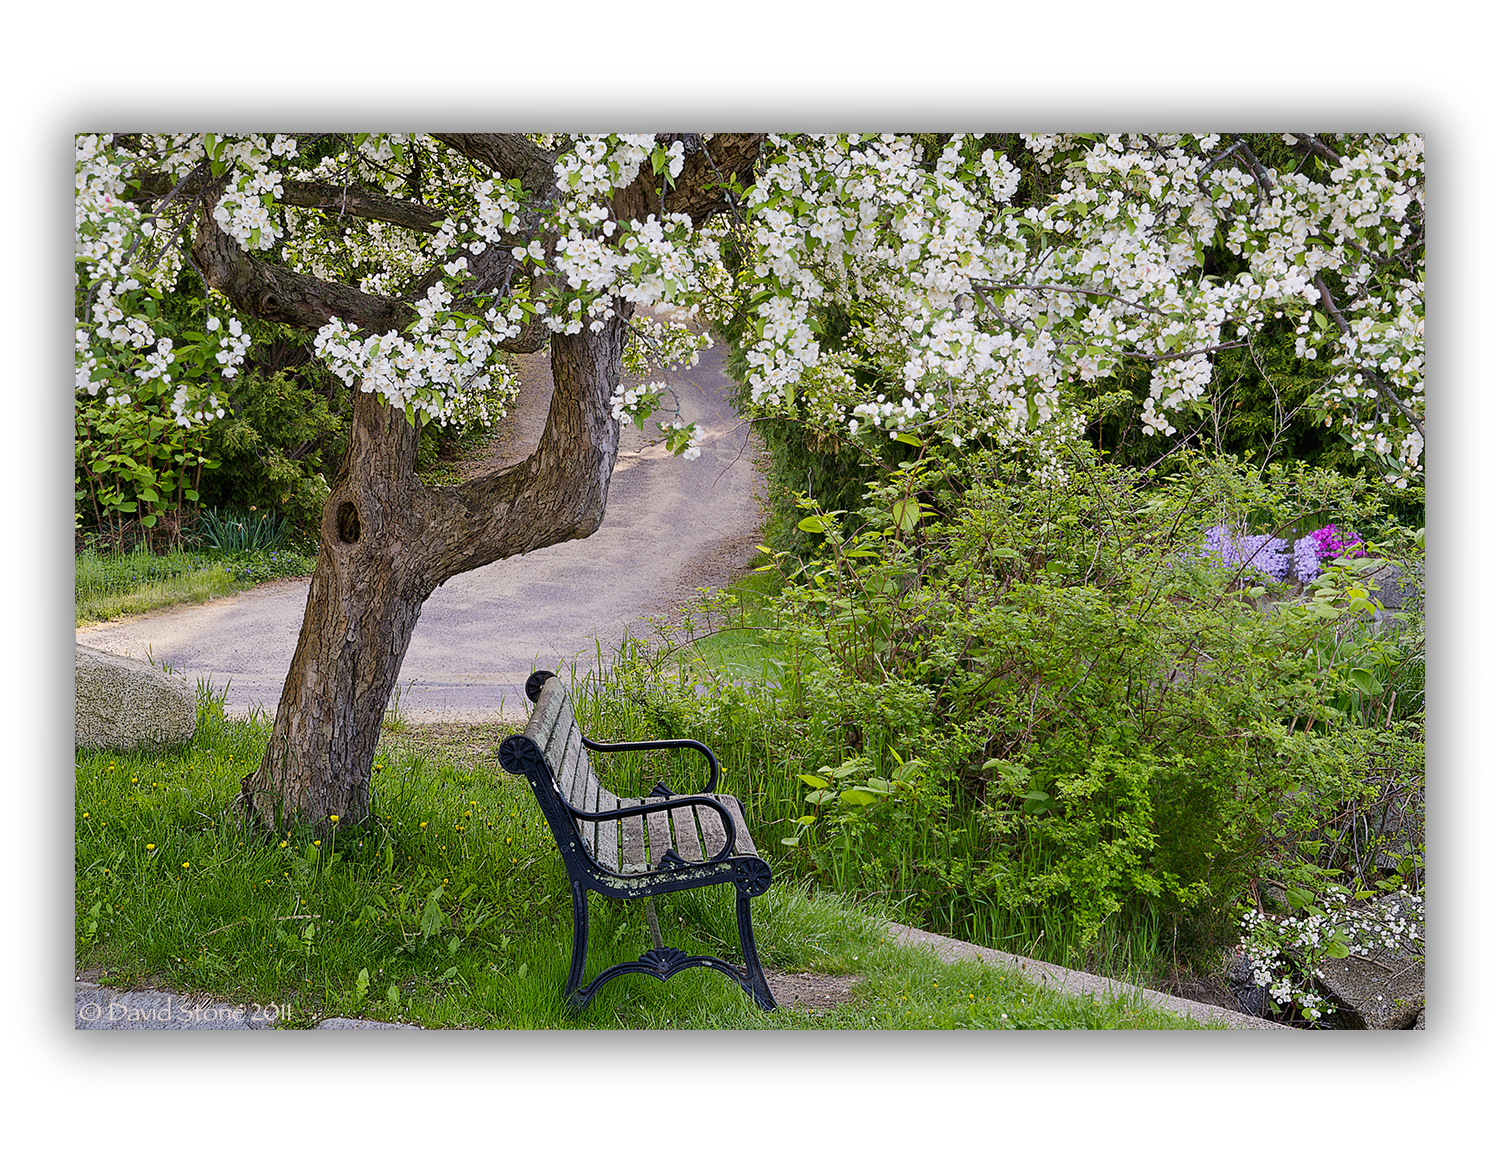 Blossoms And Bench (user submitted)